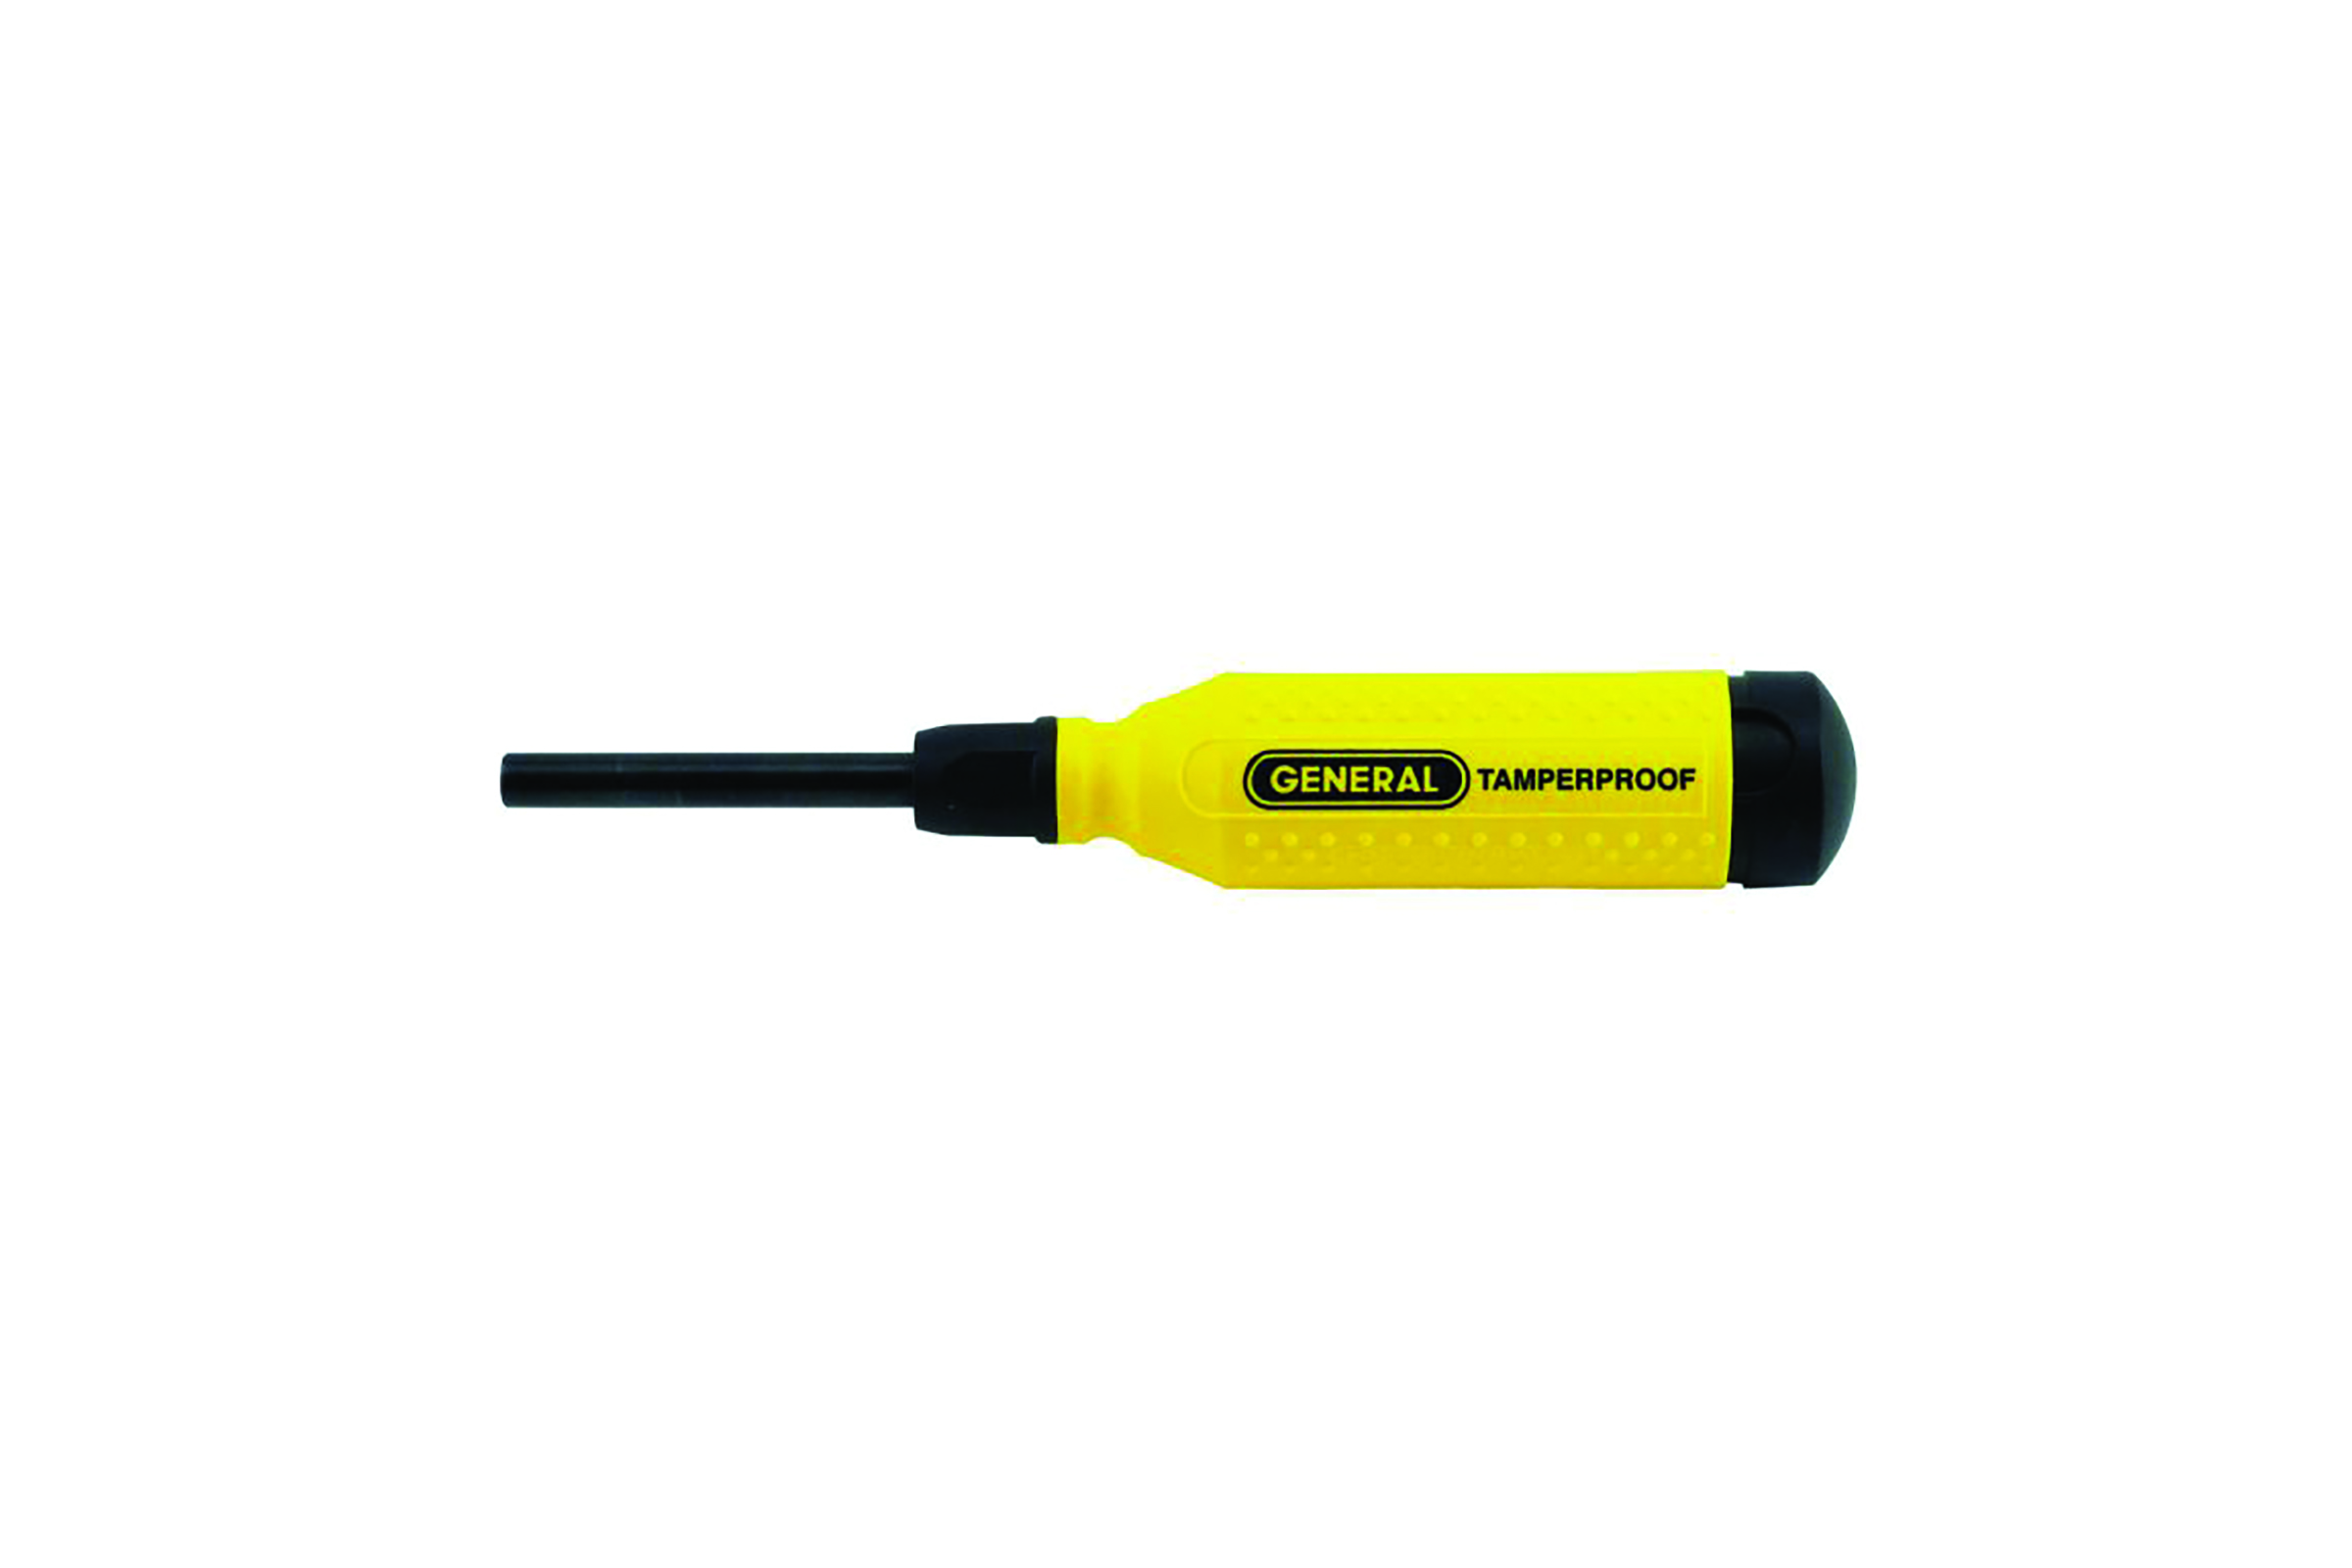 Black and yellow screwdriver. Image by General Tools.